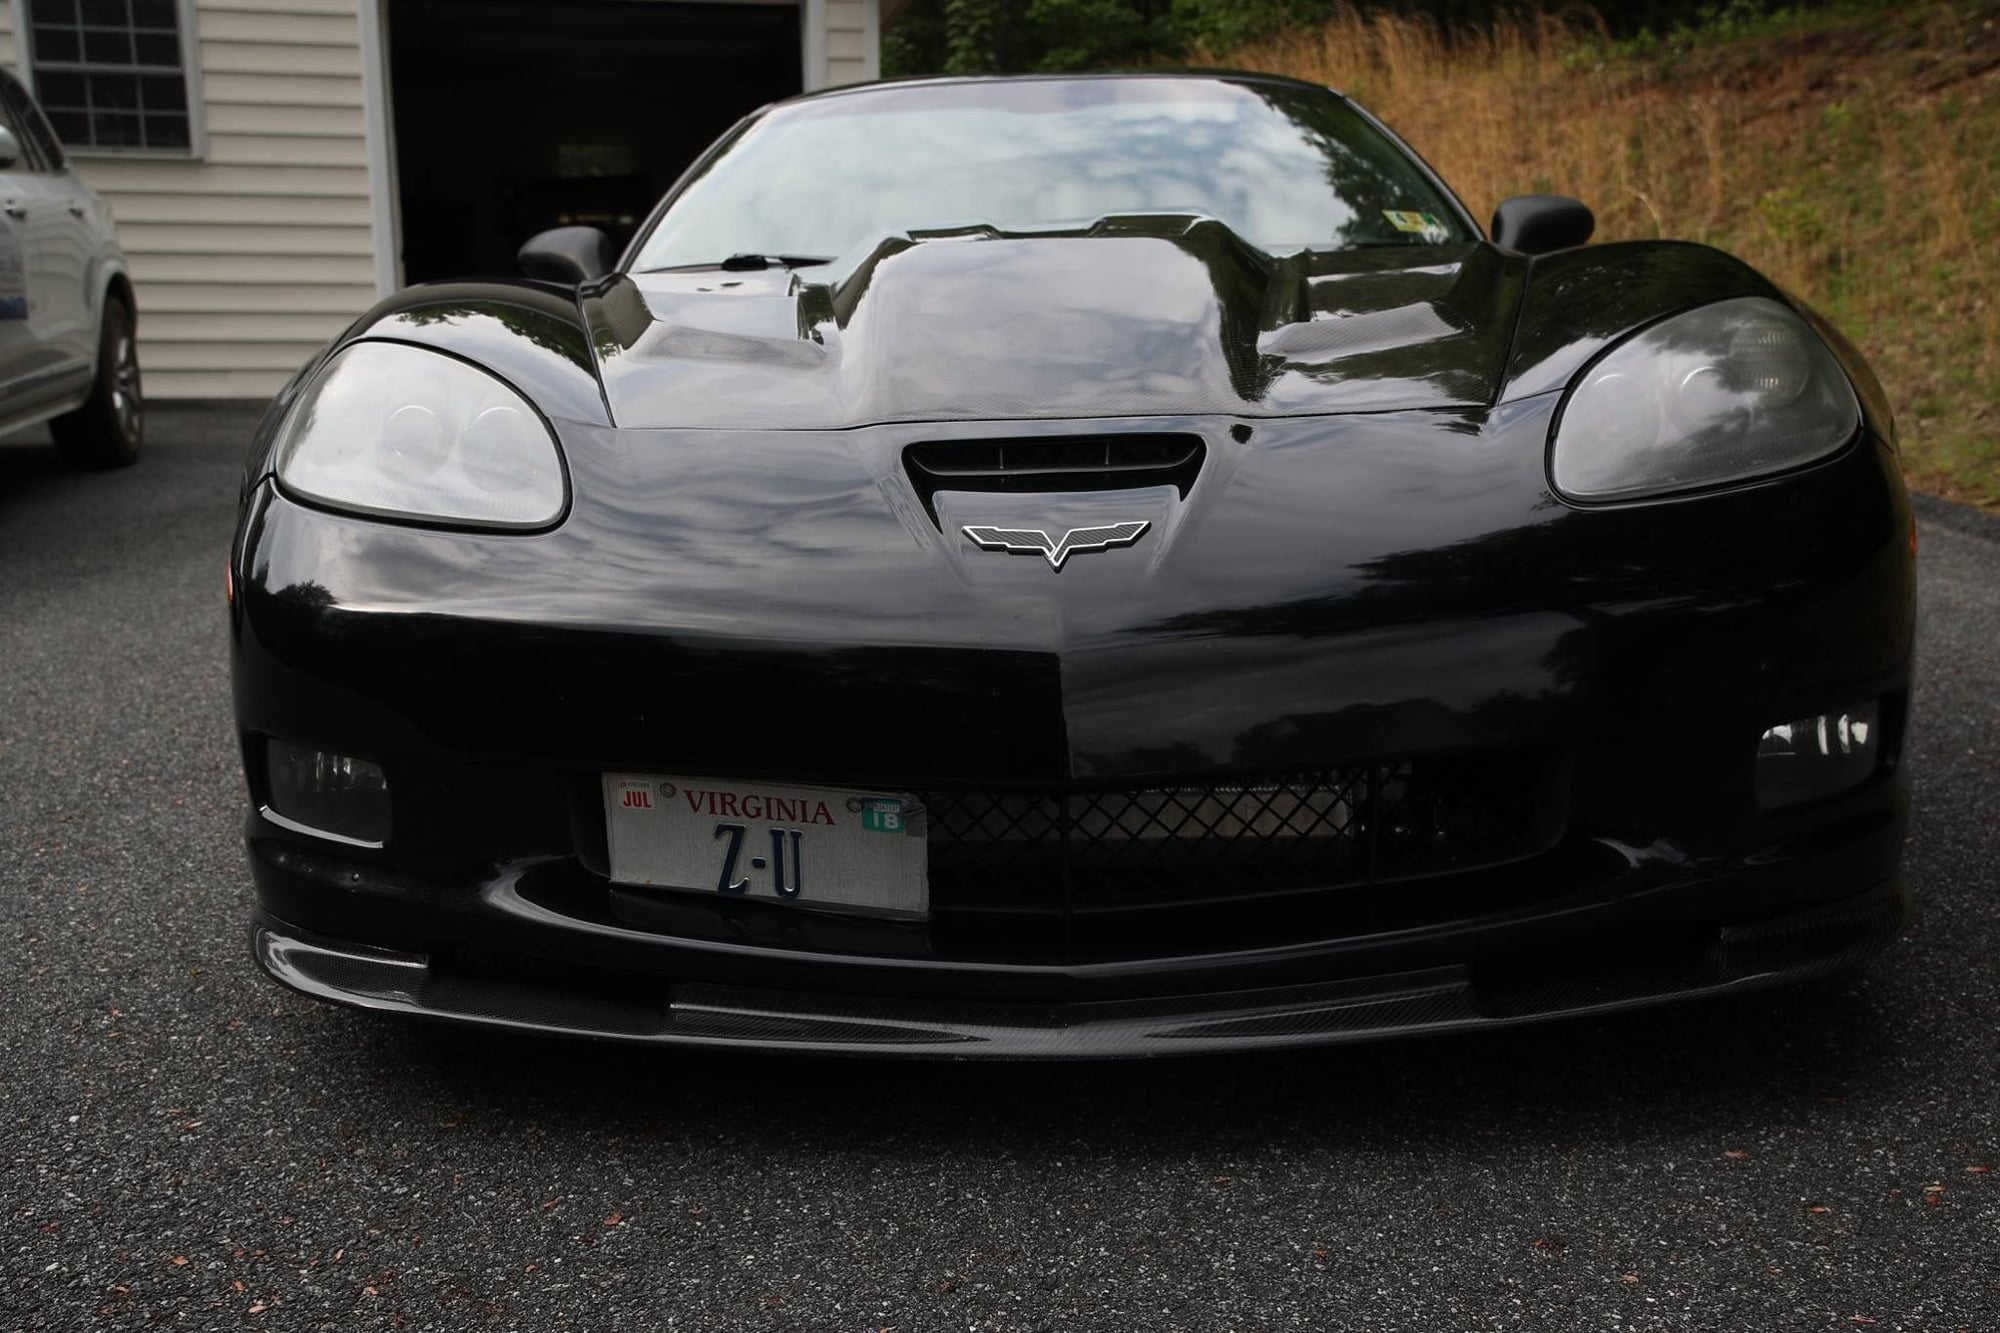 2006 Chevrolet Corvette - Heavily Modified 2006 Z06 For Sale in Charlottesville Virginia - Used - VIN 1G1YY26EX65121570 - 145,000 Miles - 8 cyl - 2WD - Manual - Coupe - Black - Charlottesville, VA 22901, United States